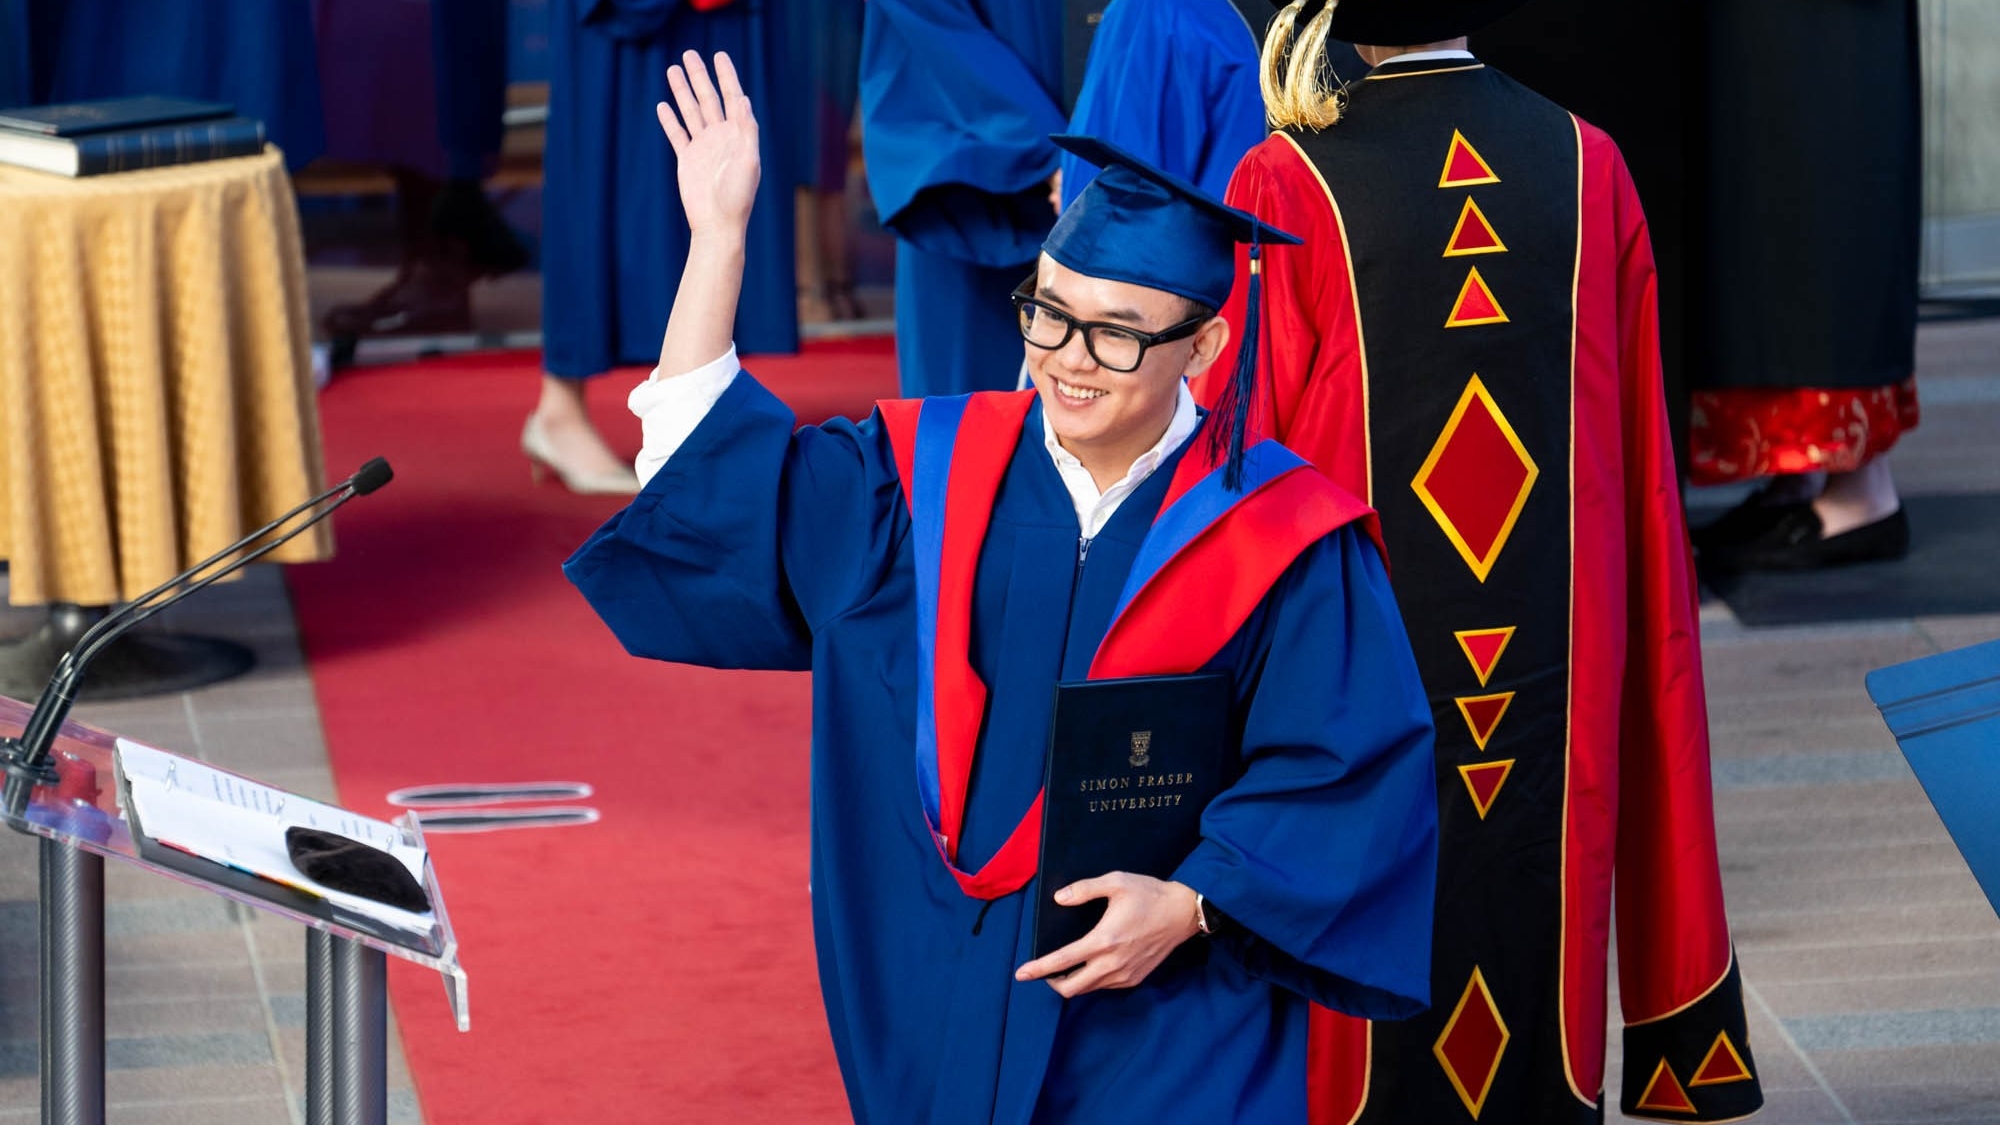 A FASS graduate crosses the stage at Convocation waving to the audience.